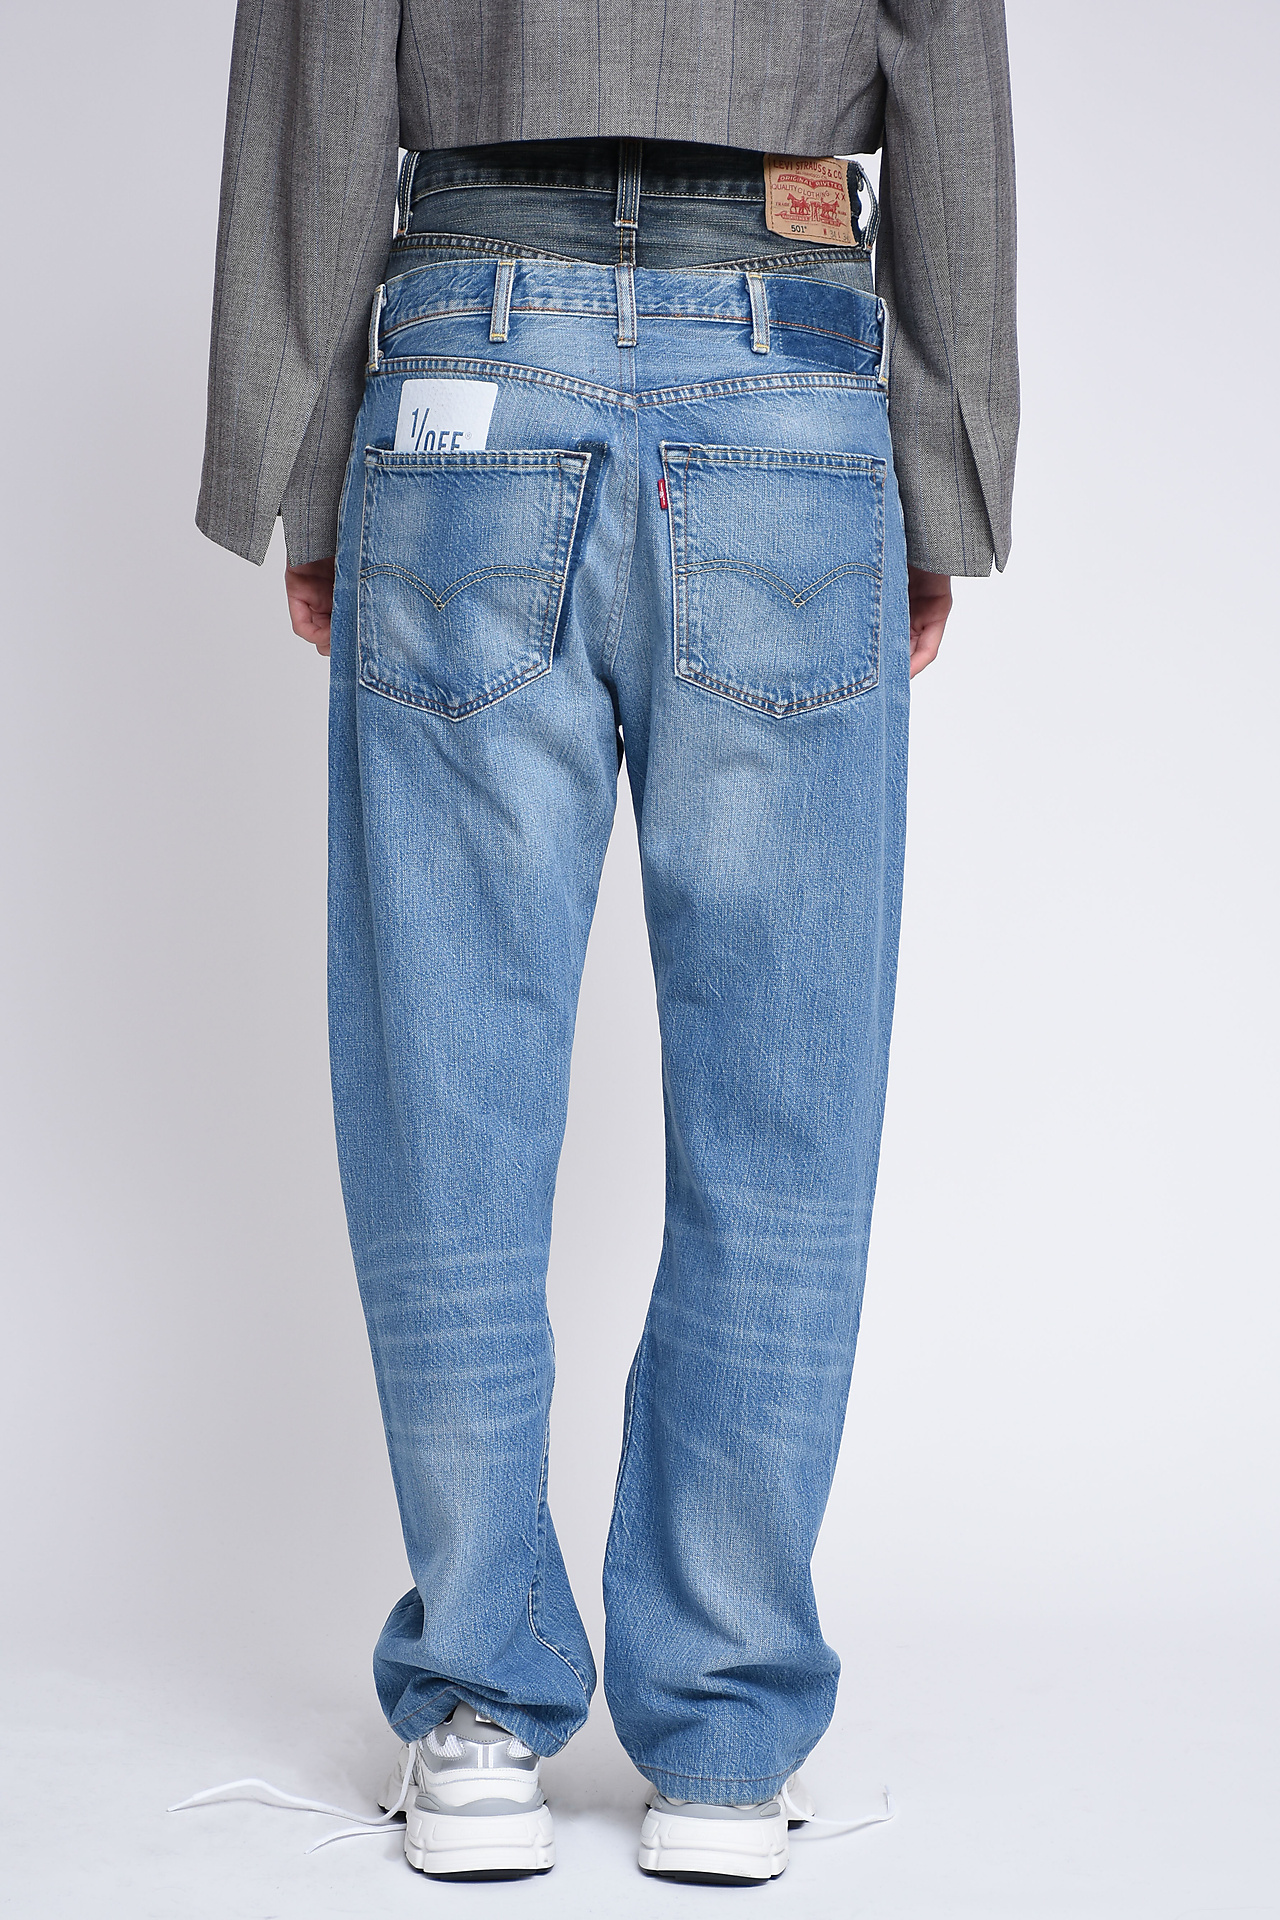 1/OFF Jeans Blue